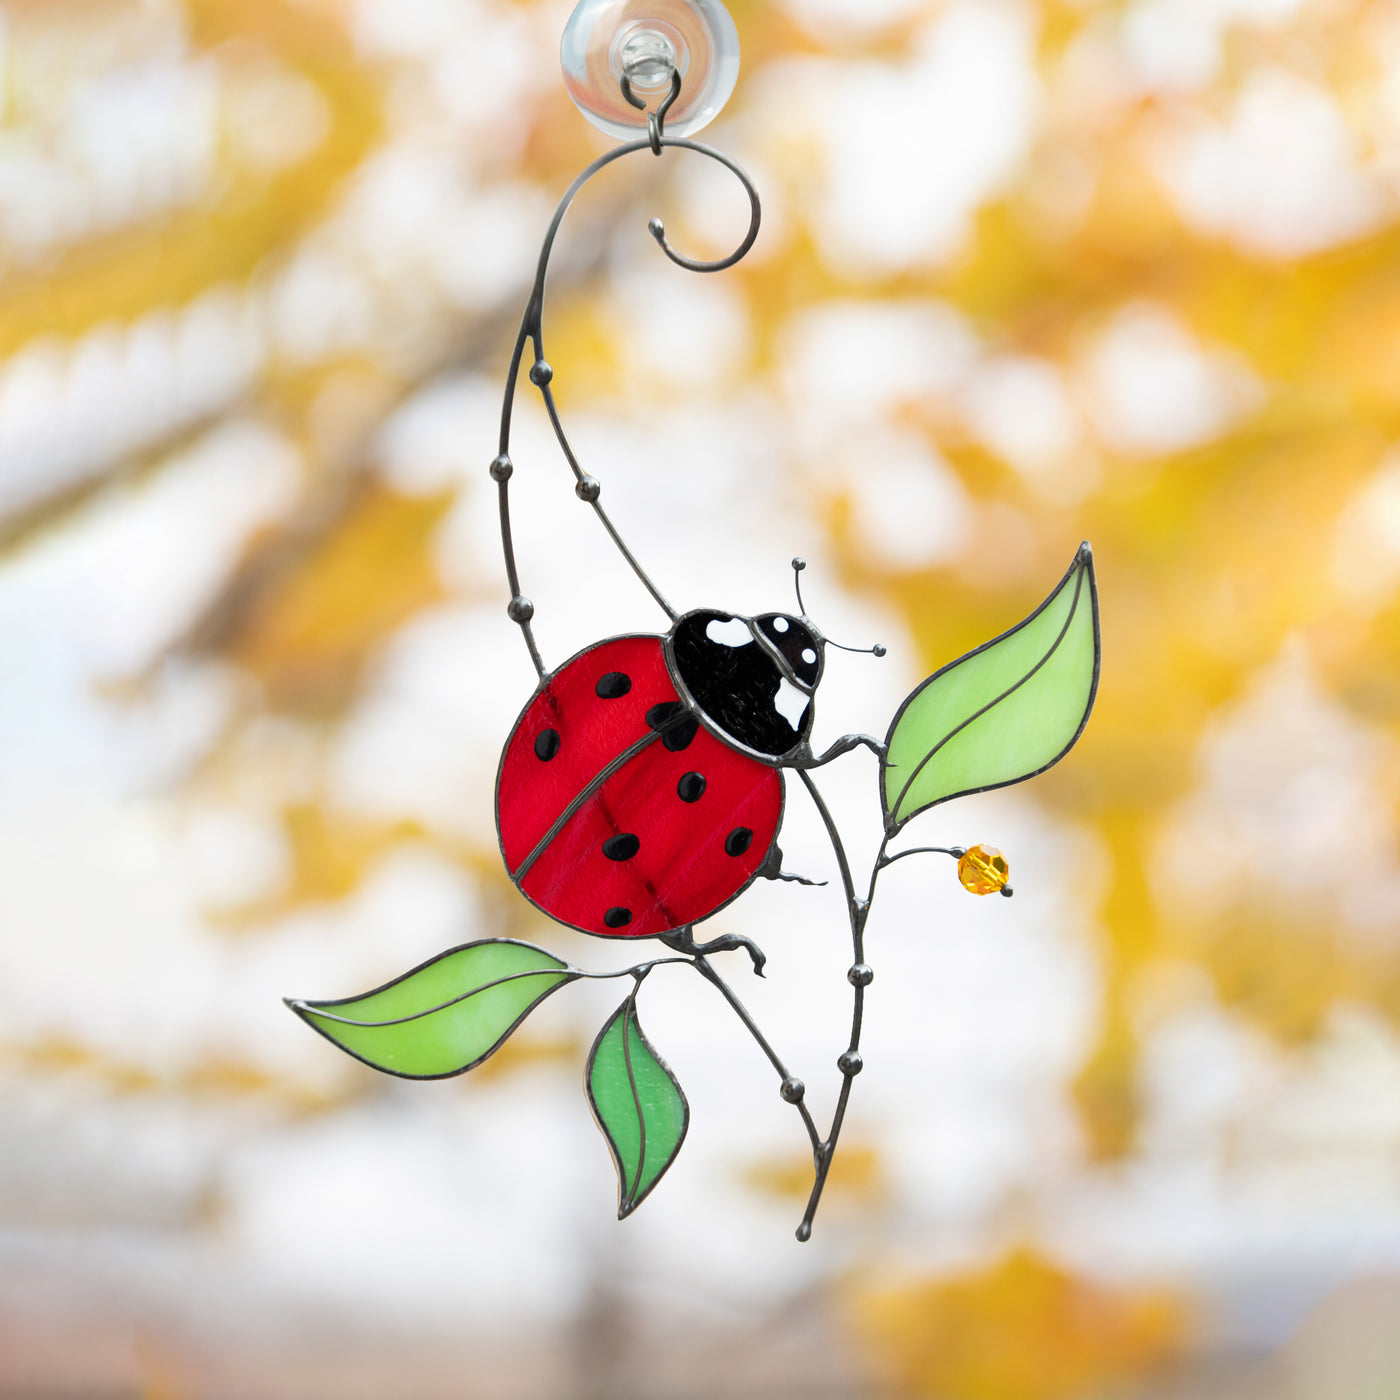 Red ladybug sitting on the branch suncatcher of stained glass